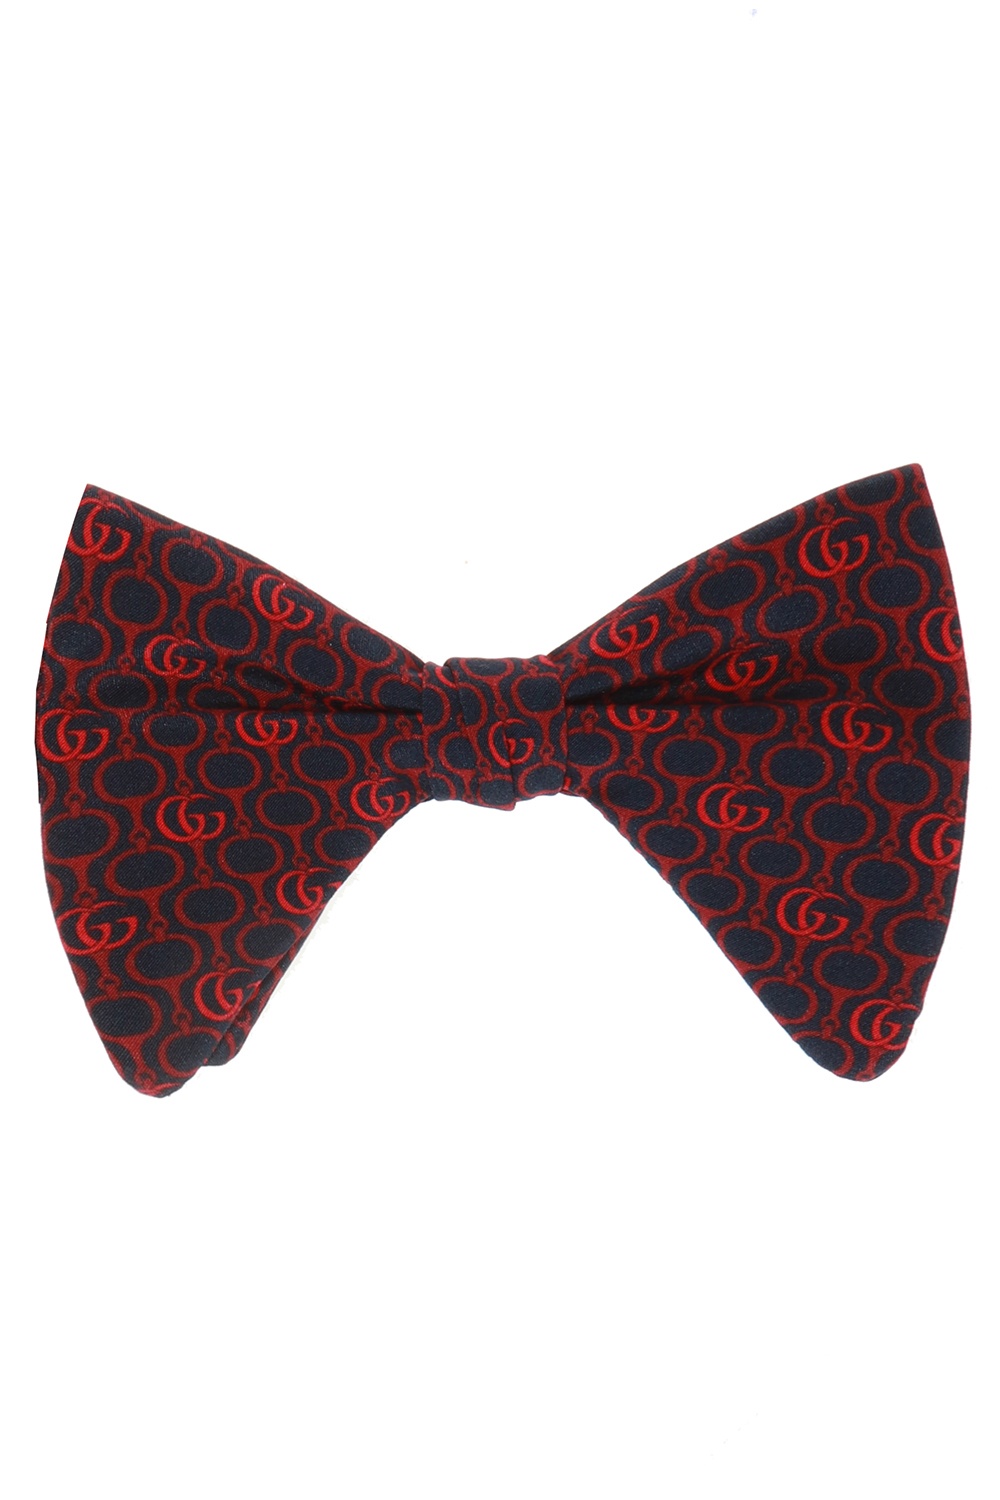 Gucci Patterned bow tie, Men's Accessories